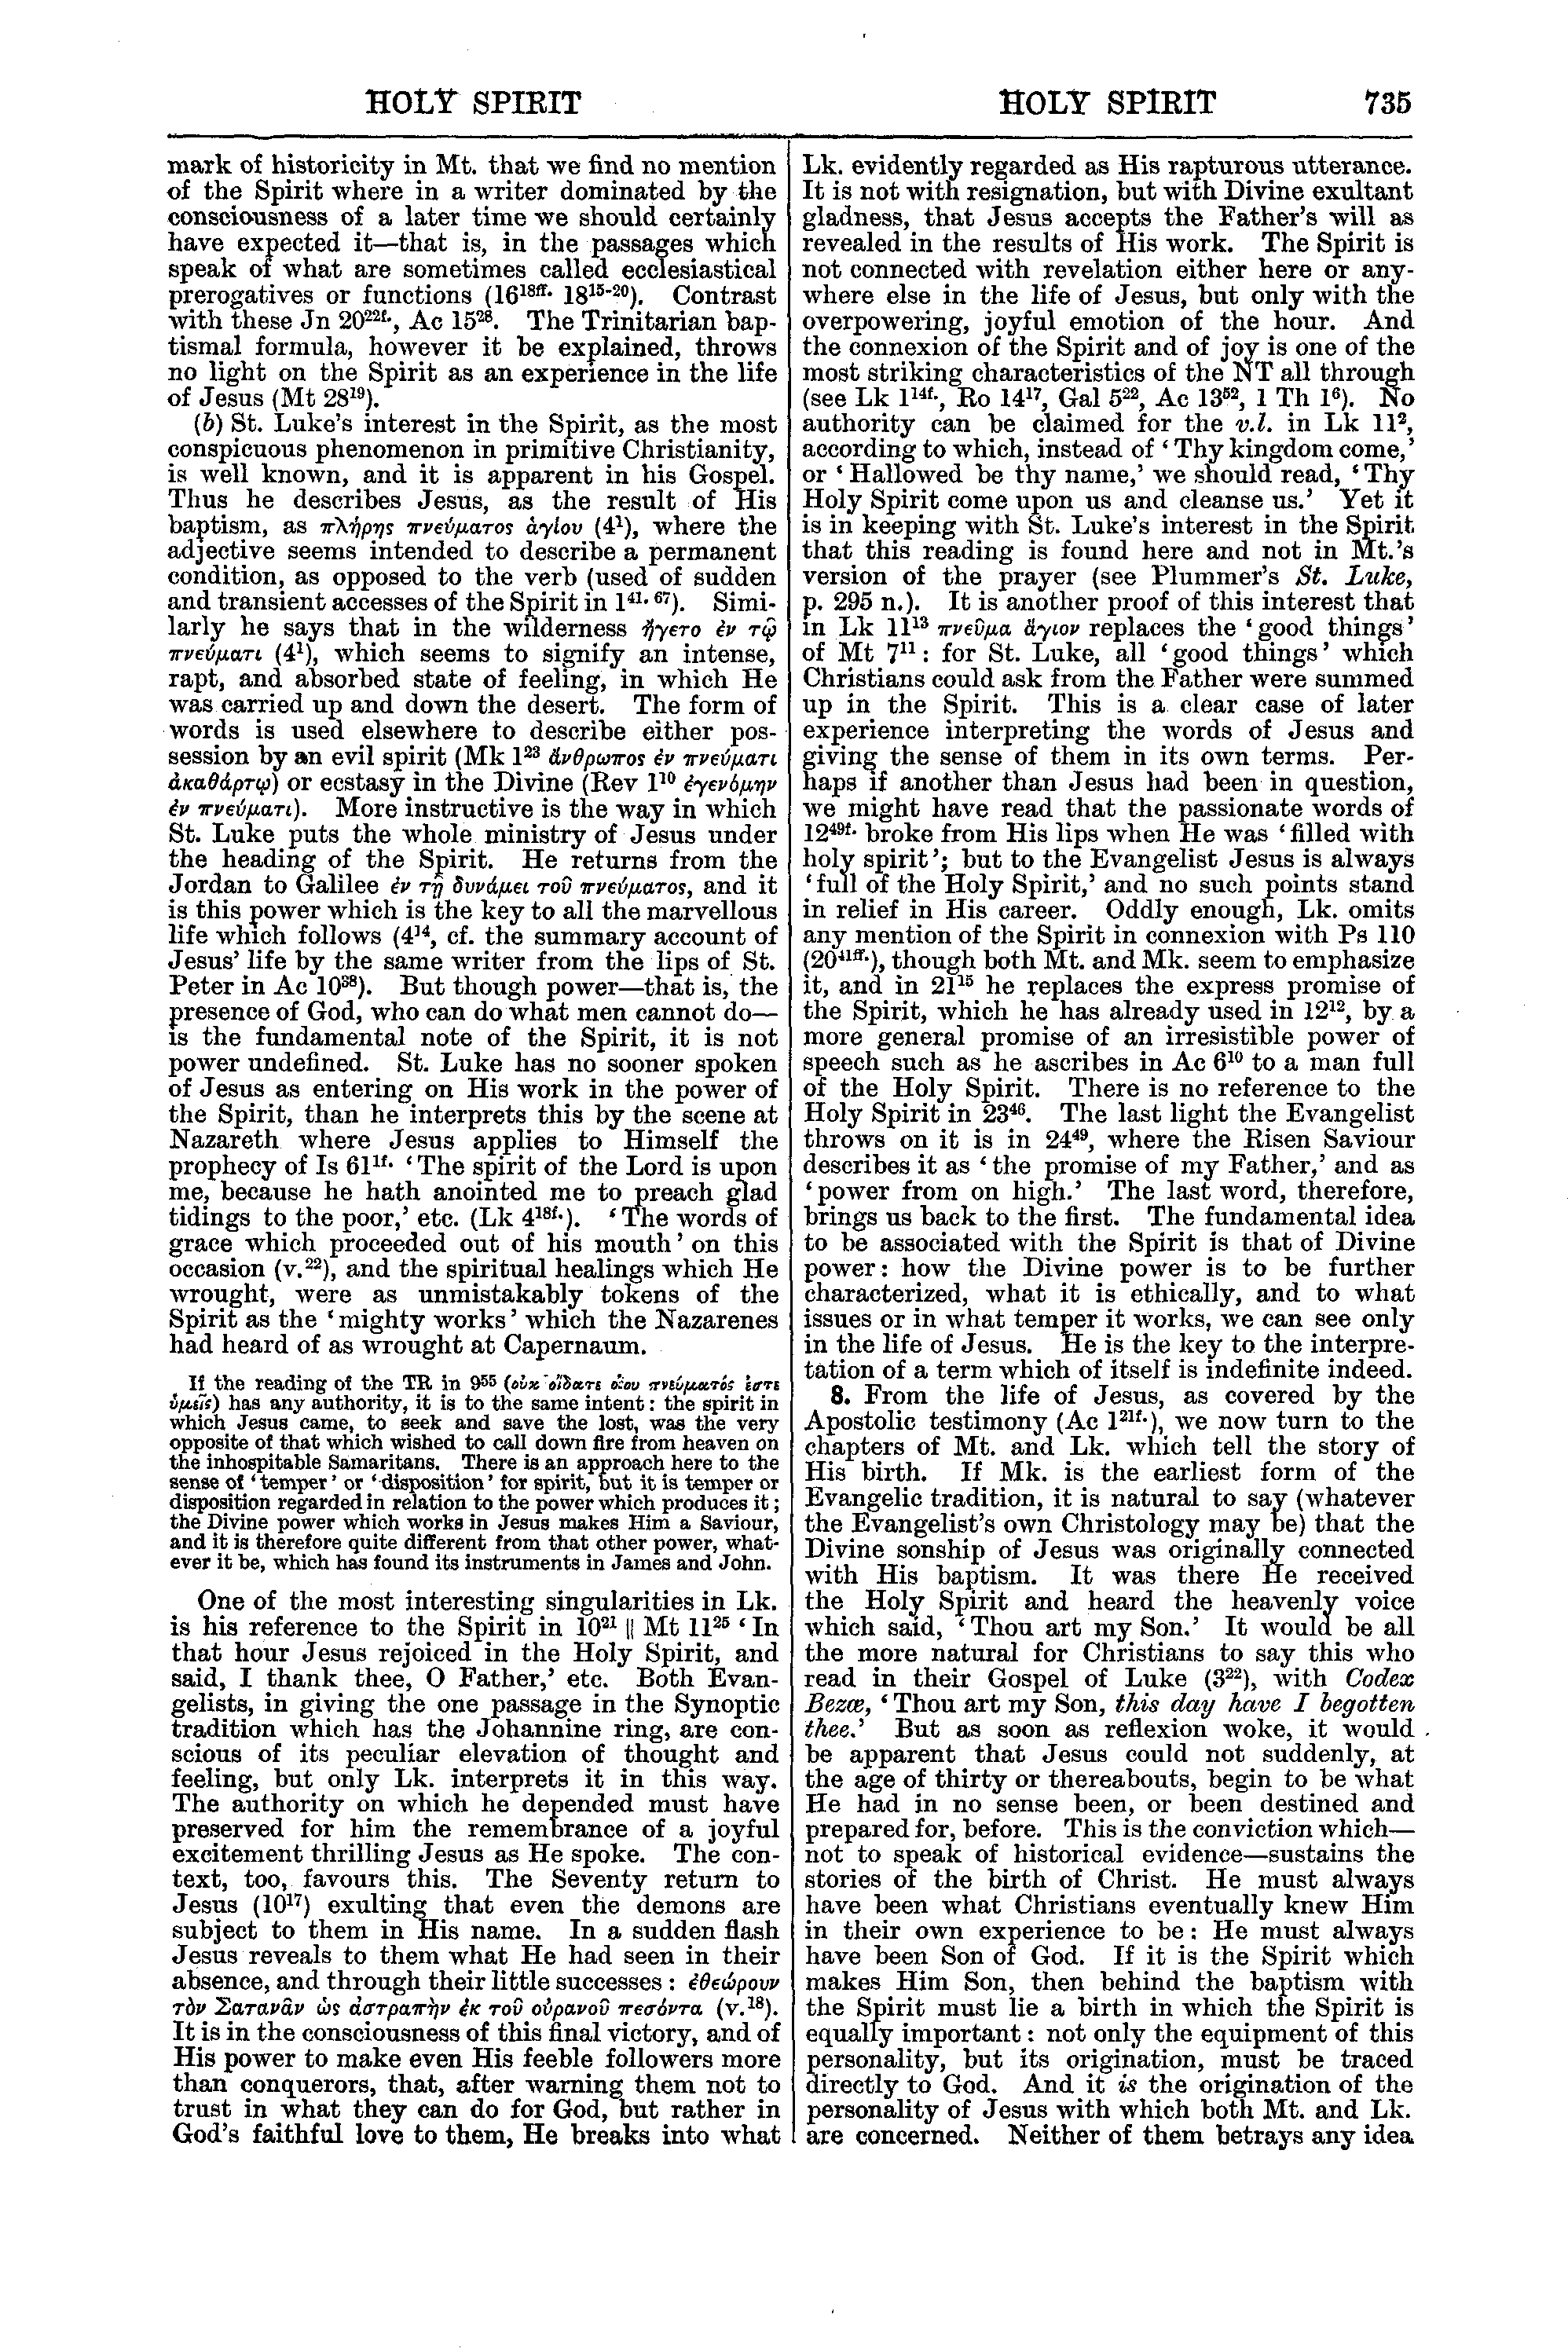 Image of page 735